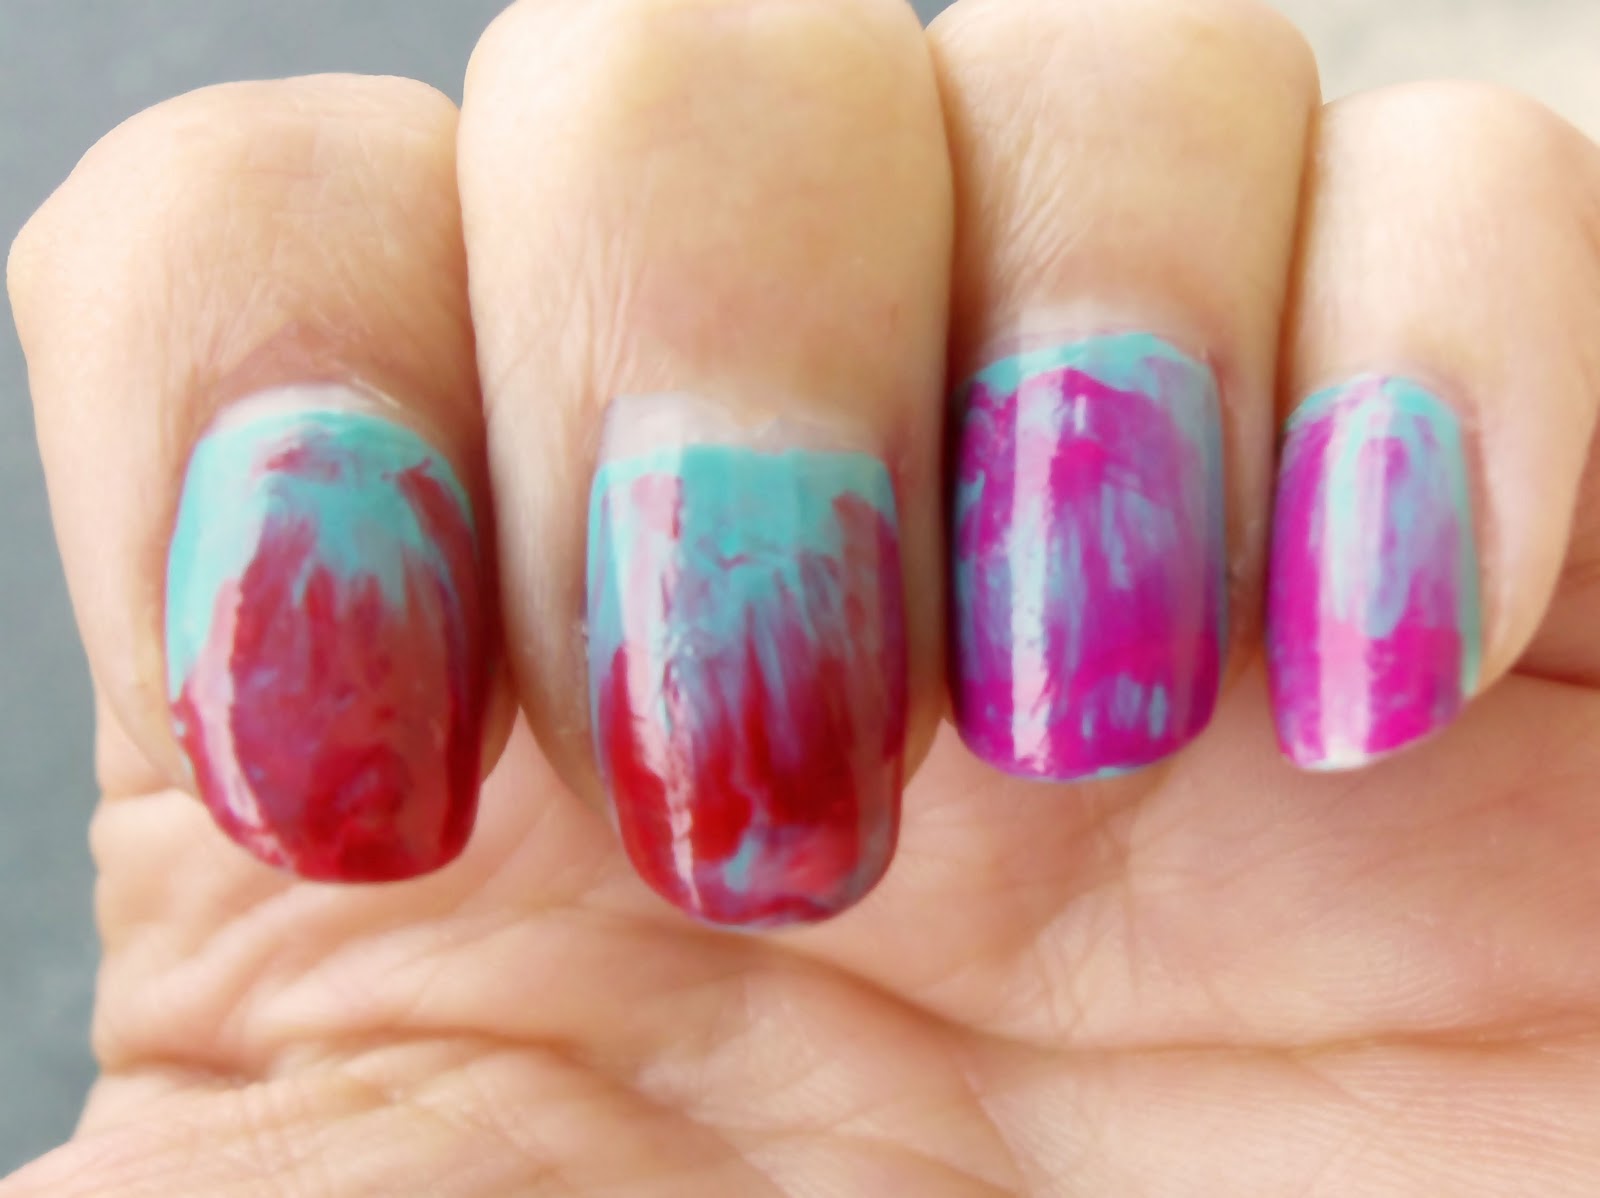 7. "Watercolor Nails" - wide 8